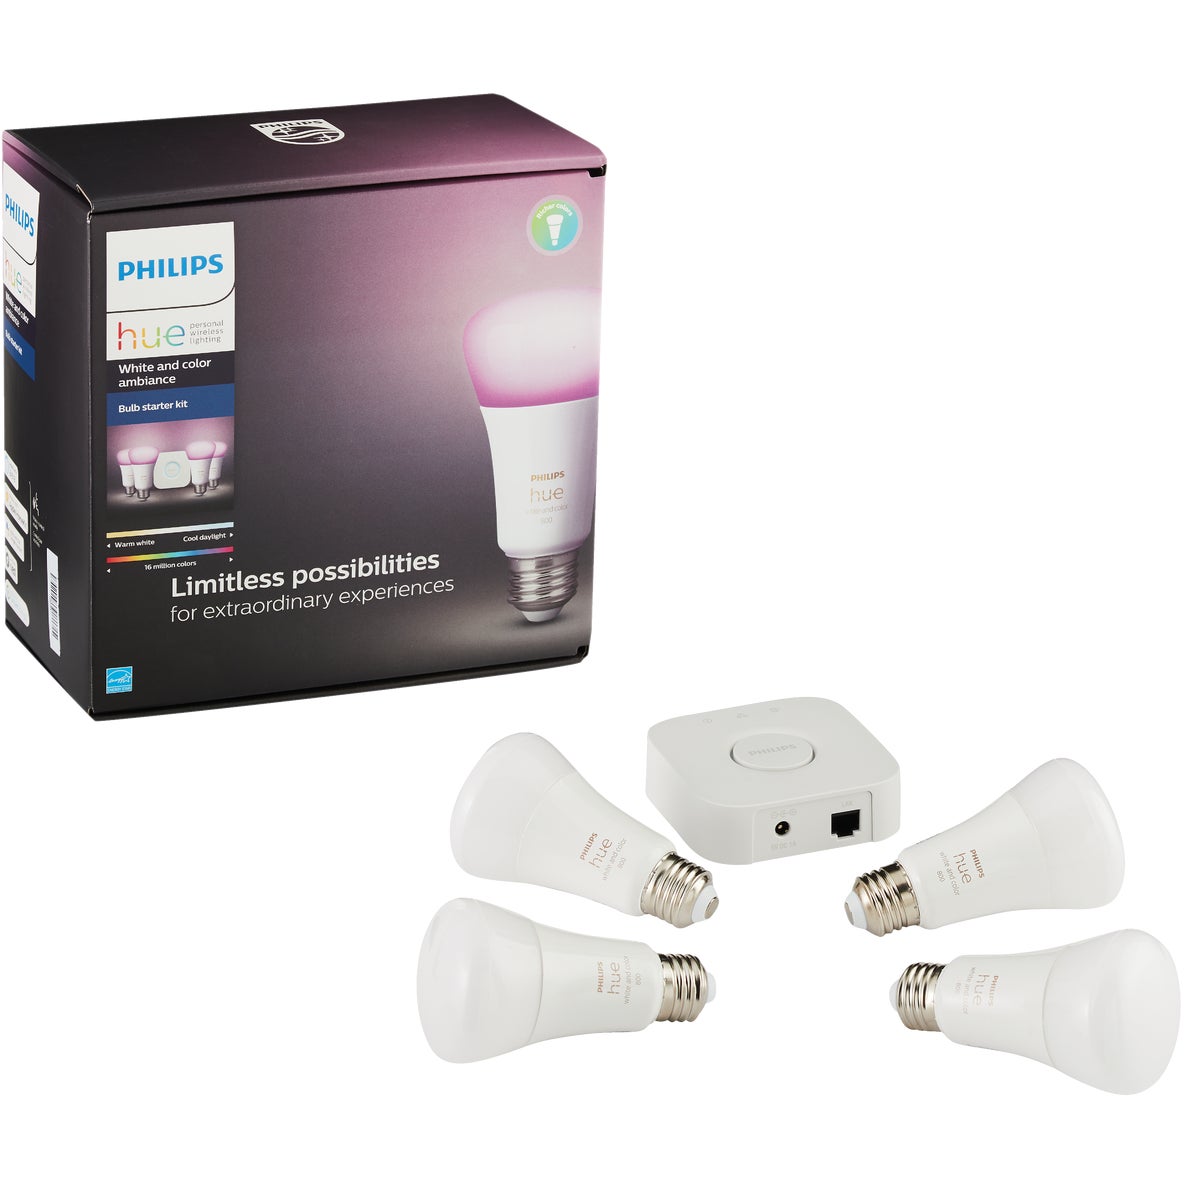 Philips Hue White & Color Ambiance 60W Equivalent Medium A19 Dimmable LED Light Bulb Bluetooth Starter Kit